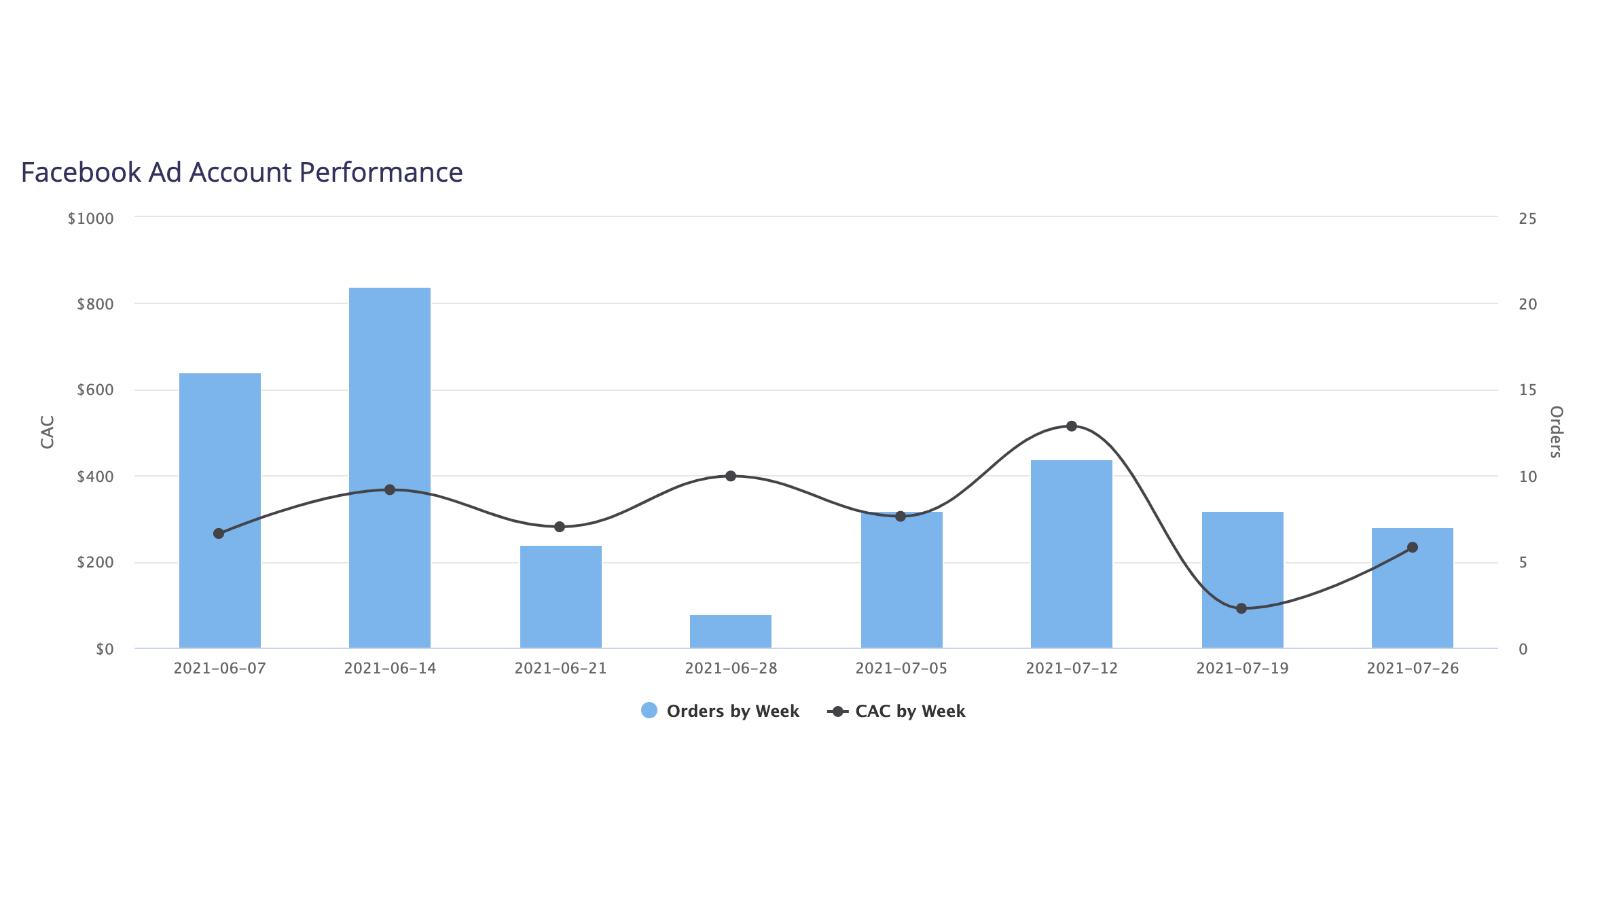 Facebook ad account performance over time